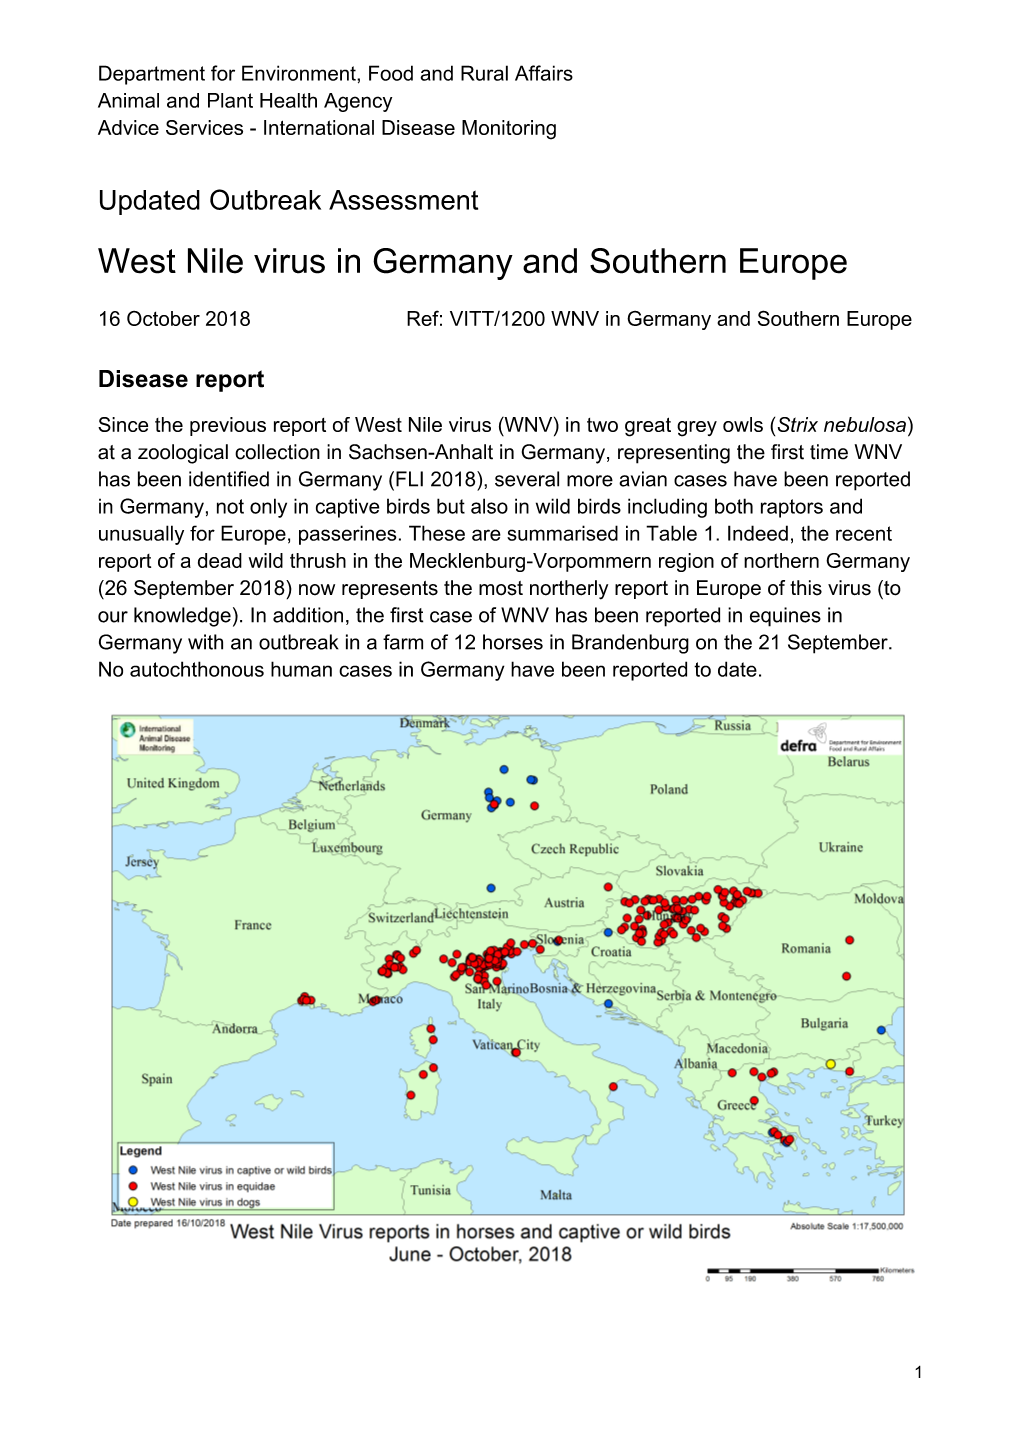 West Nile Virus in Germany and Southern Europe